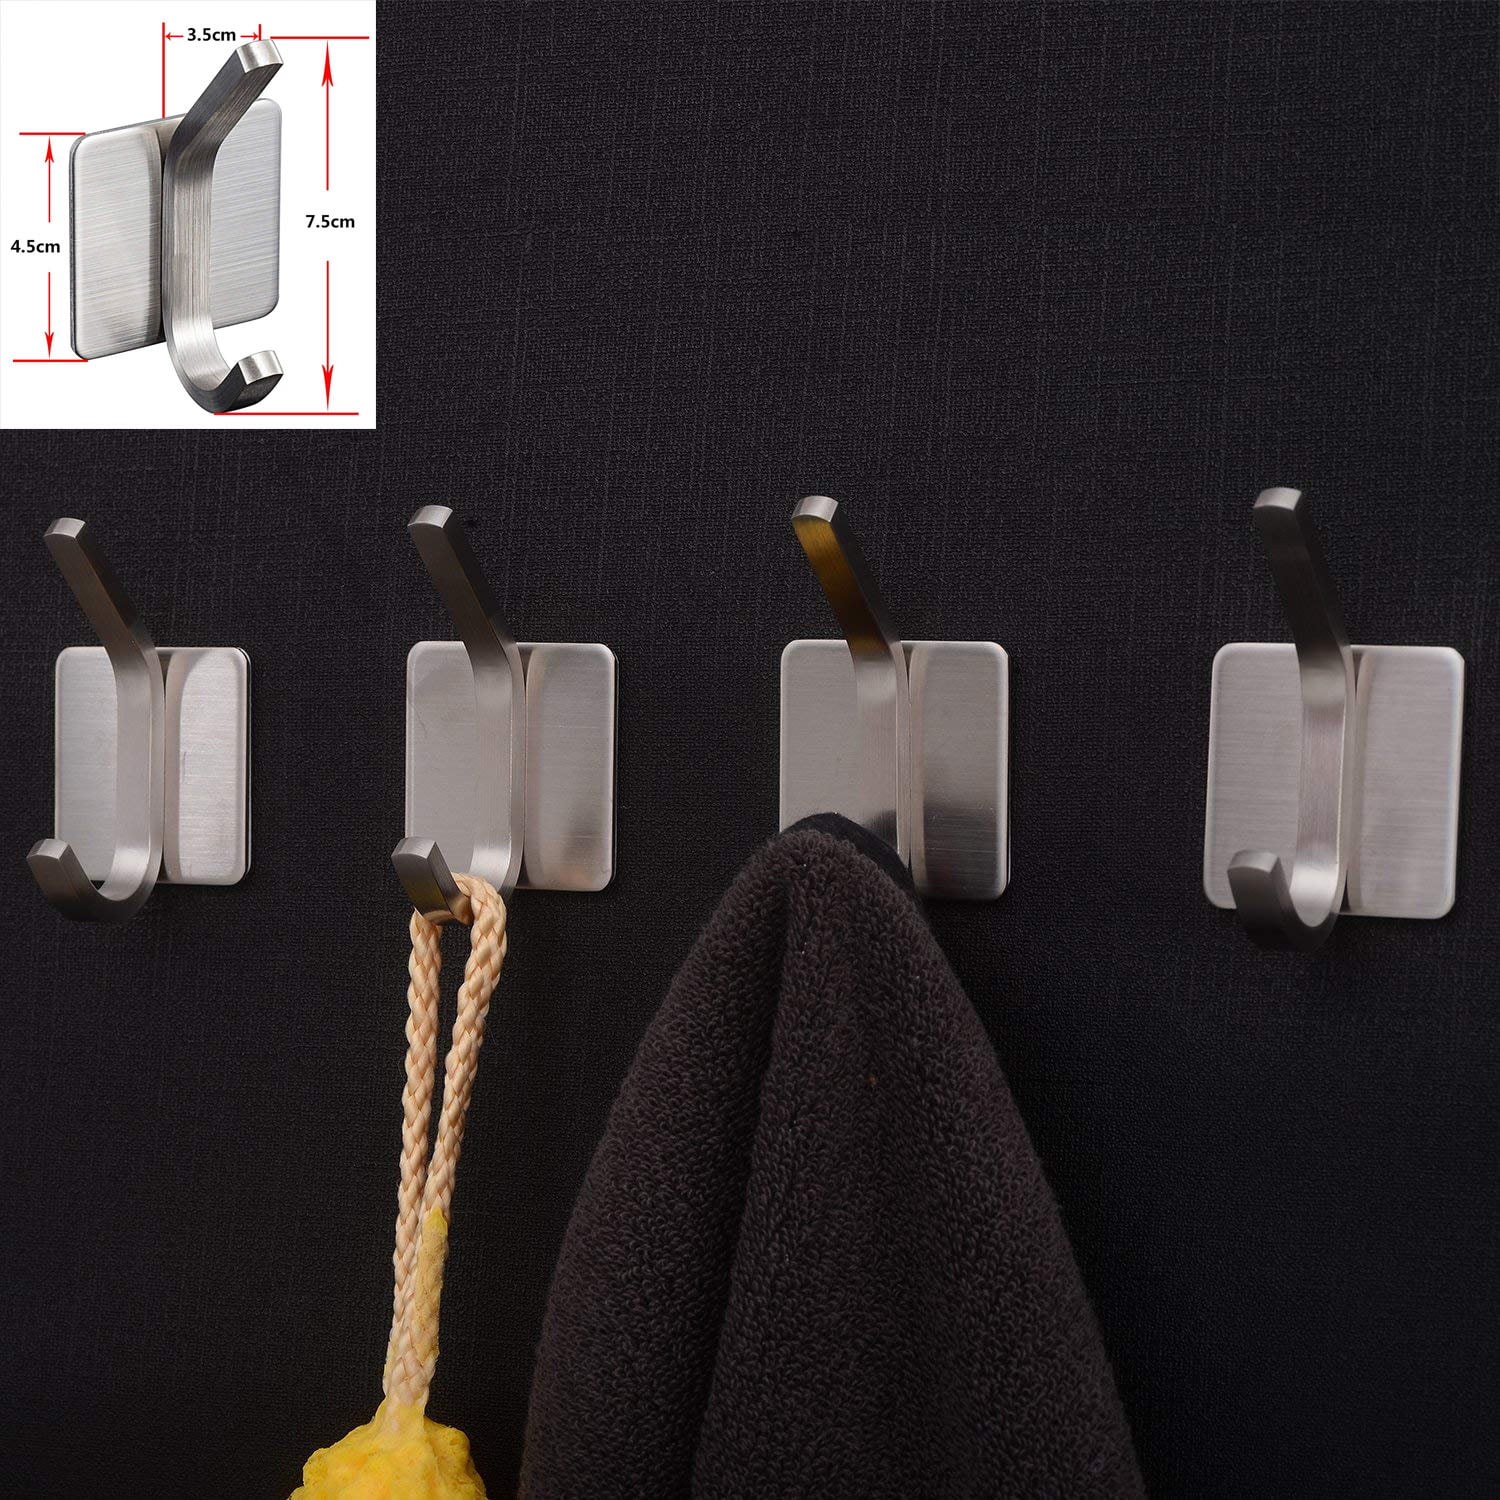 GOANDO 5 Pack Adhesive Hooks 3M Heavy Duty Wall Hook Towel Hooks and Coat Hooks Stick on Cabinet Doors Stainless Steel Self Adhesive Holders for Hanging Bathroom Kitchen Command Hooks 